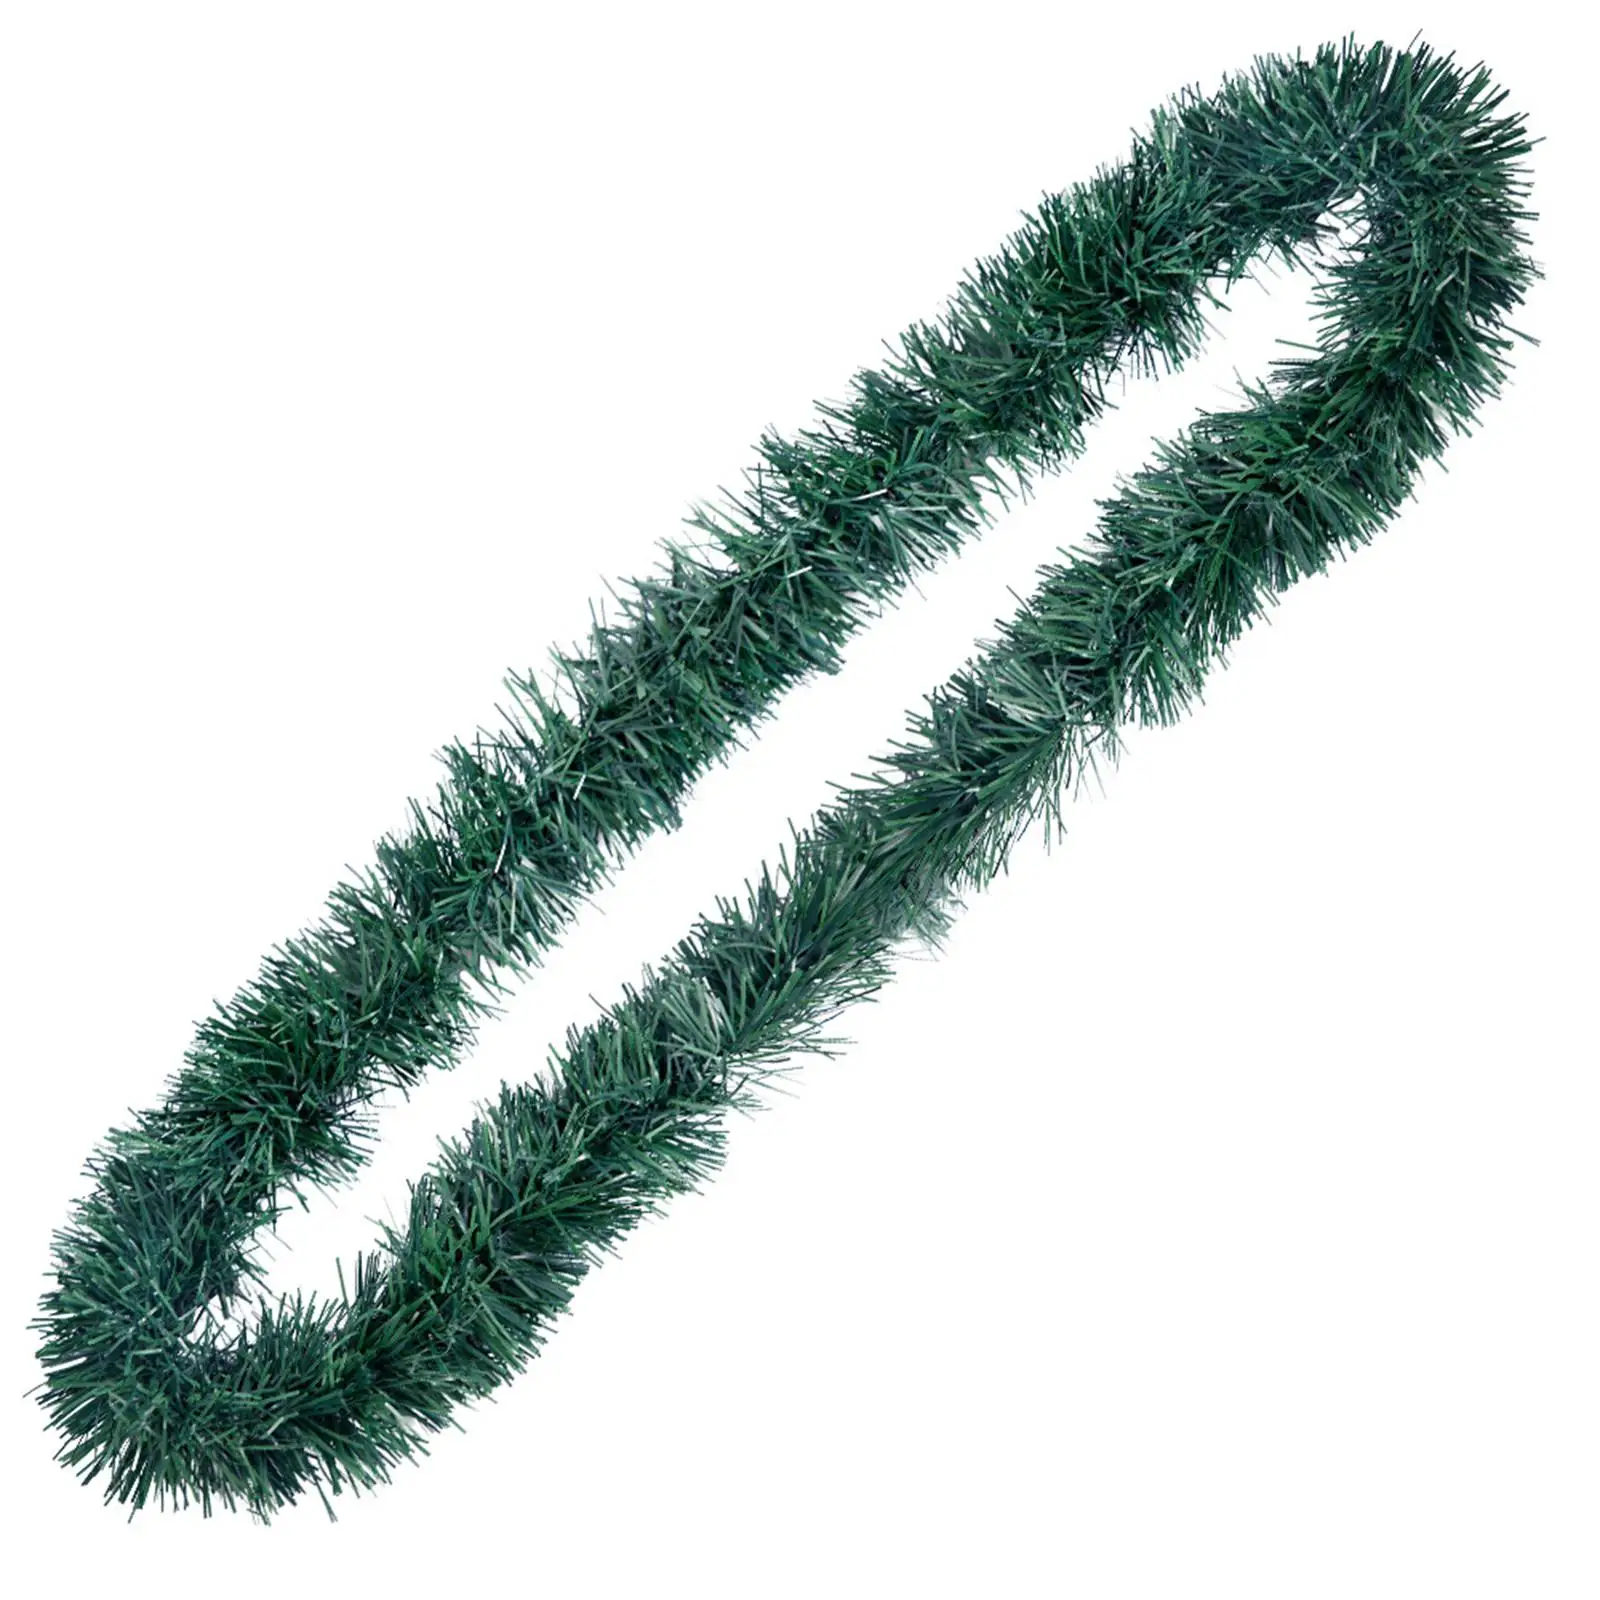 2x Artificial Christmas Garland Holiday Party Decor for Stairs Wedding Doors